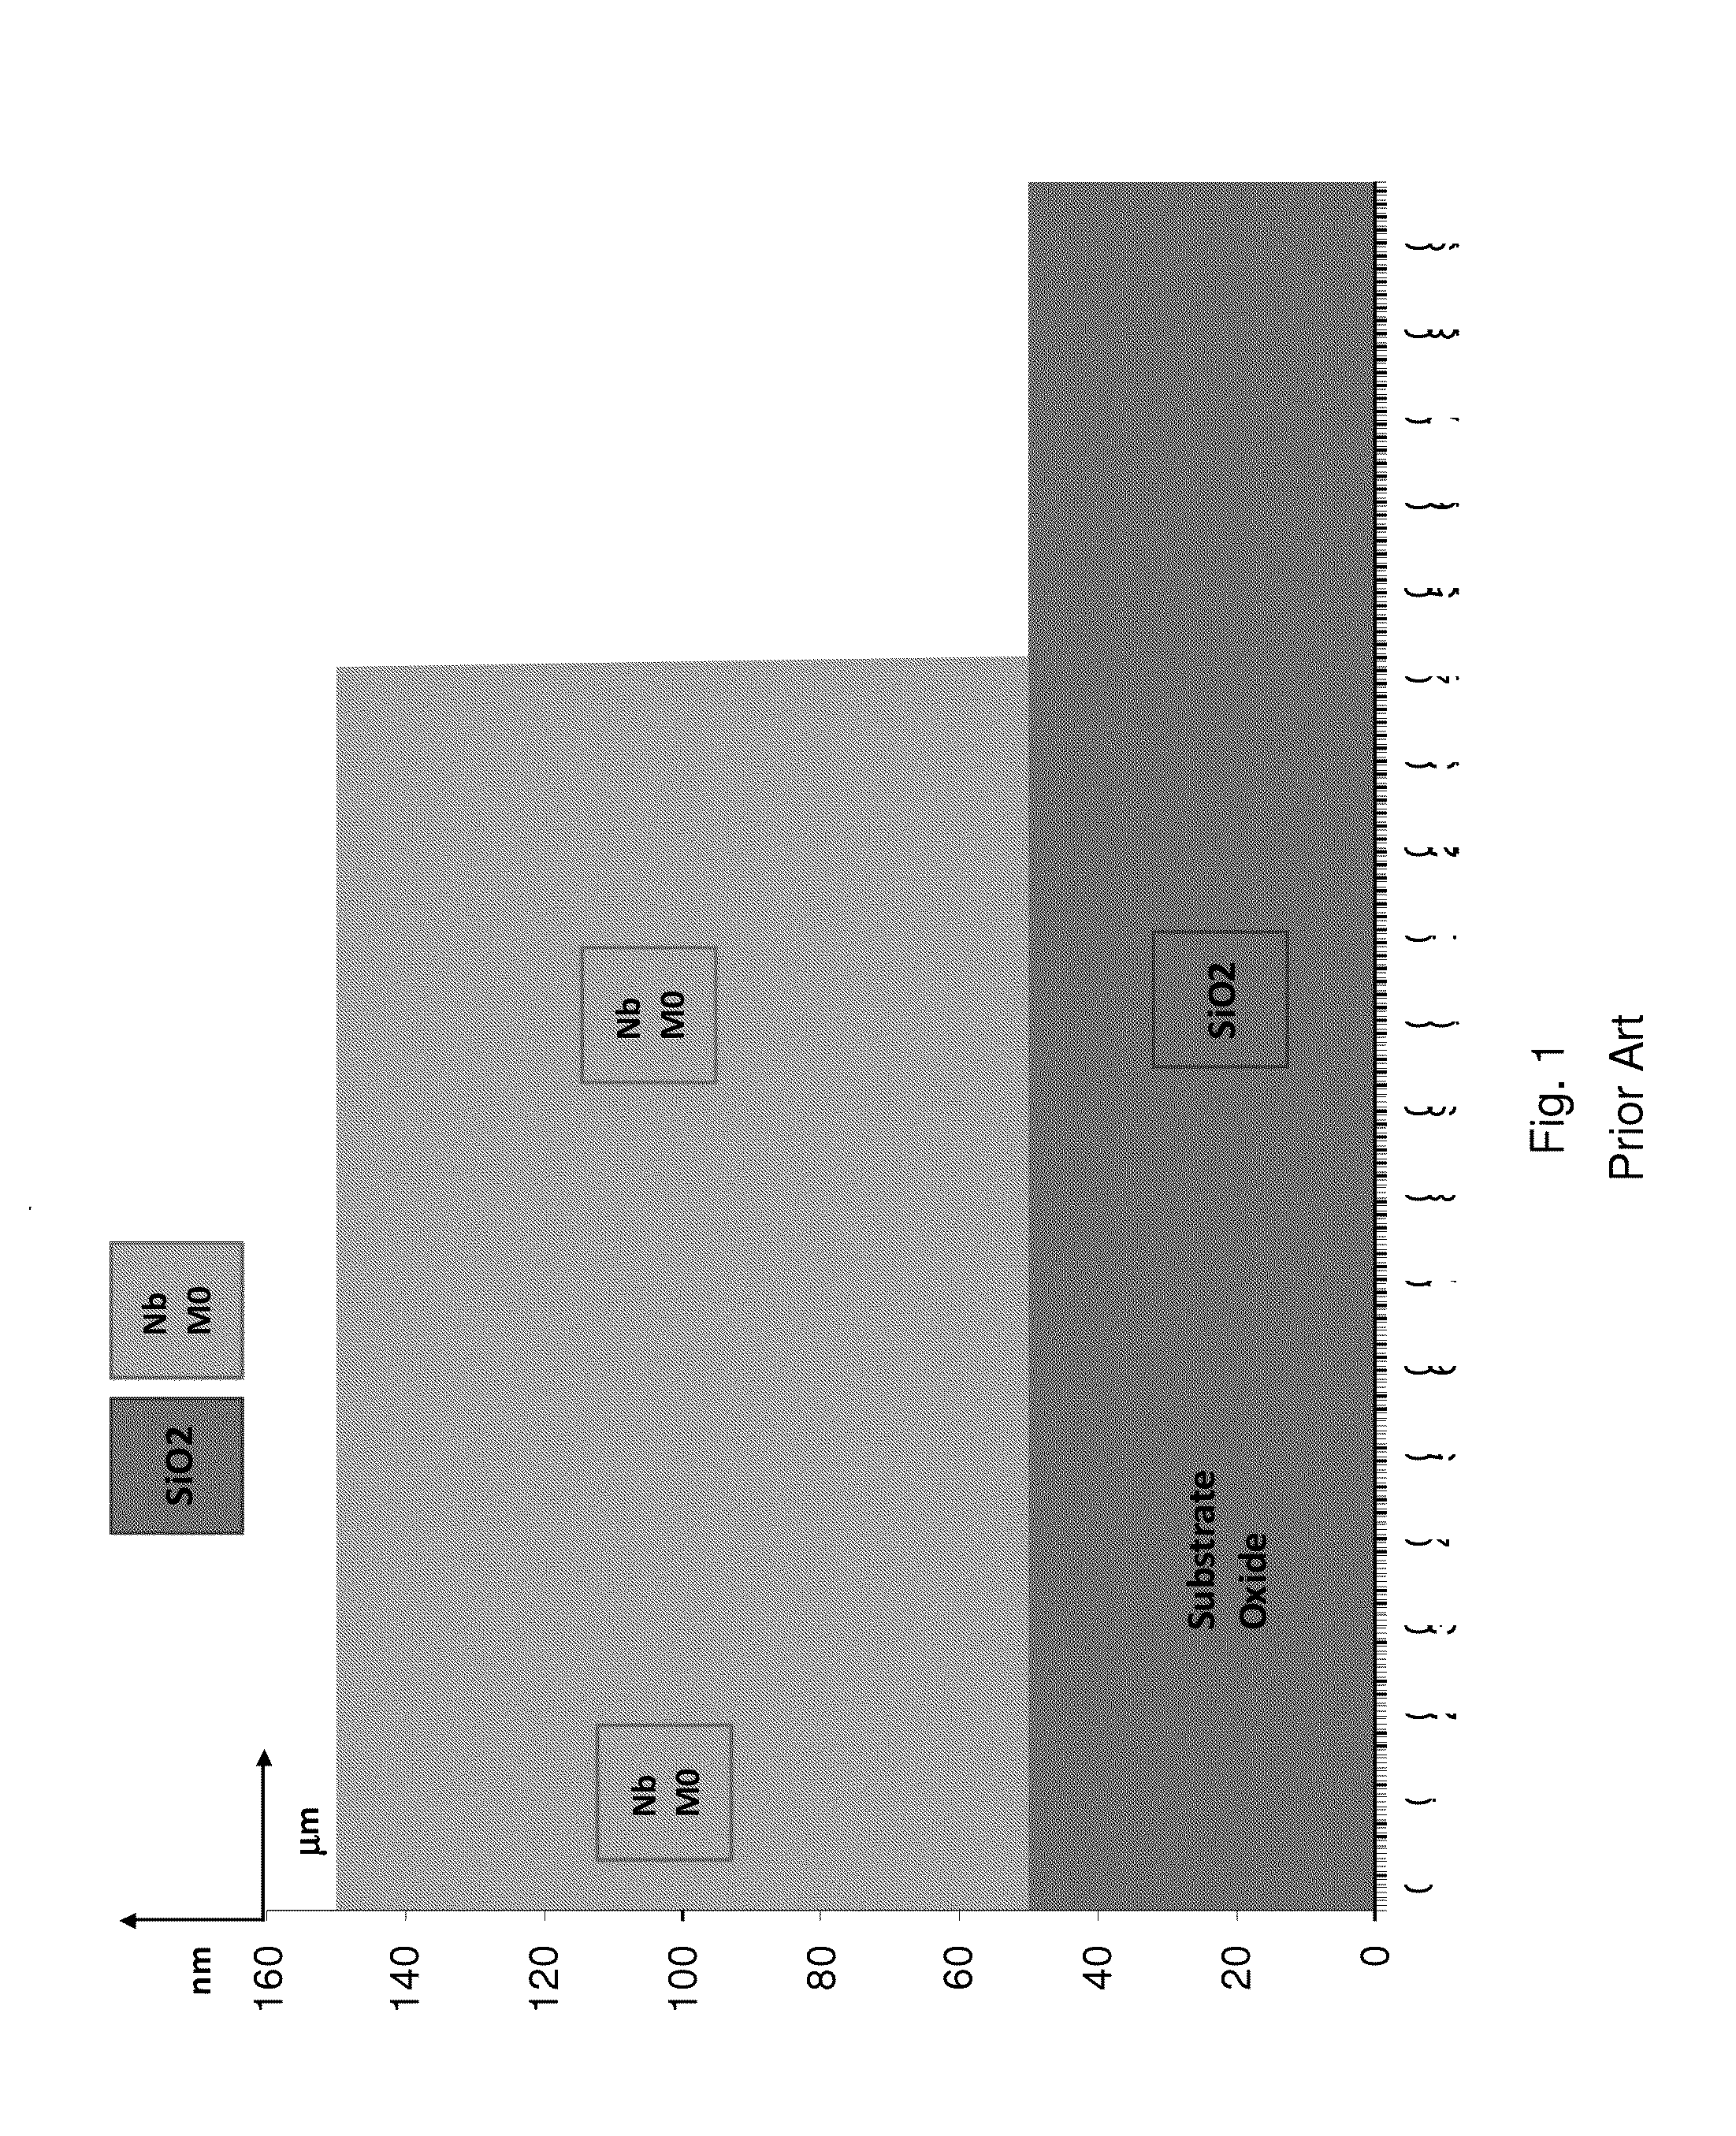 Method for increasing the integration level of superconducting electronics circuits, and a resulting circuit